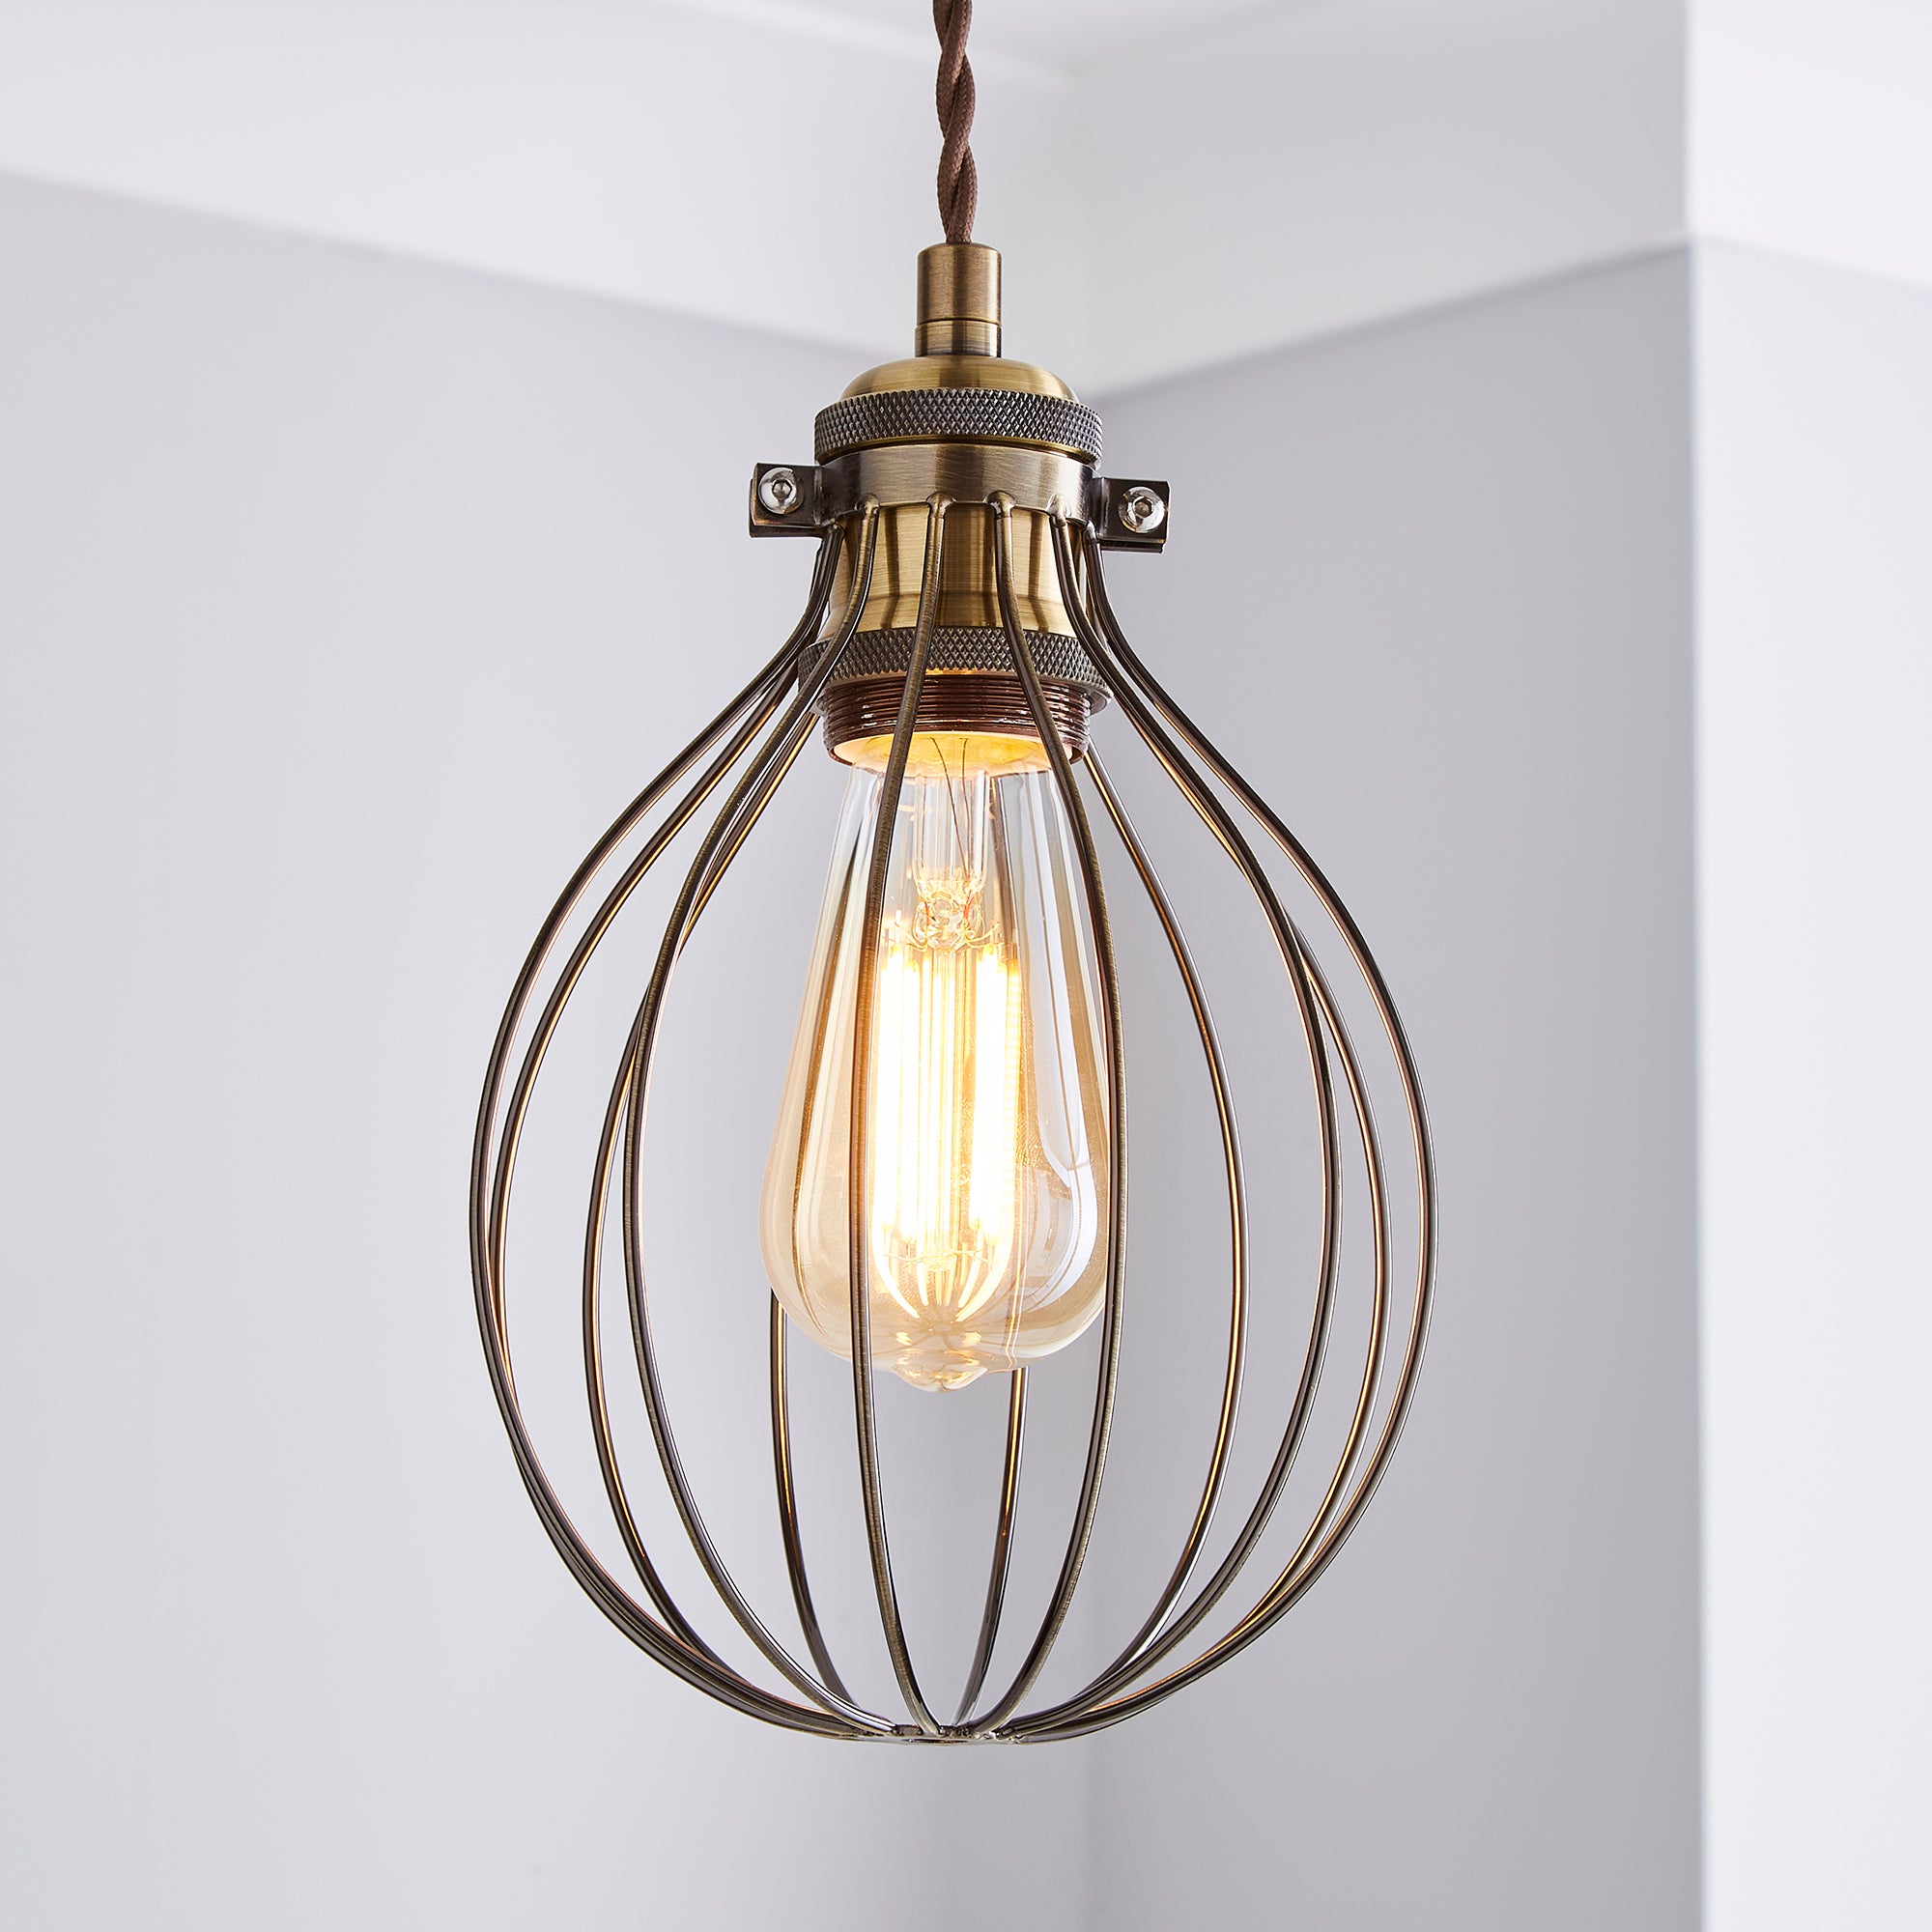 Charlie Industrial Bulb Cage